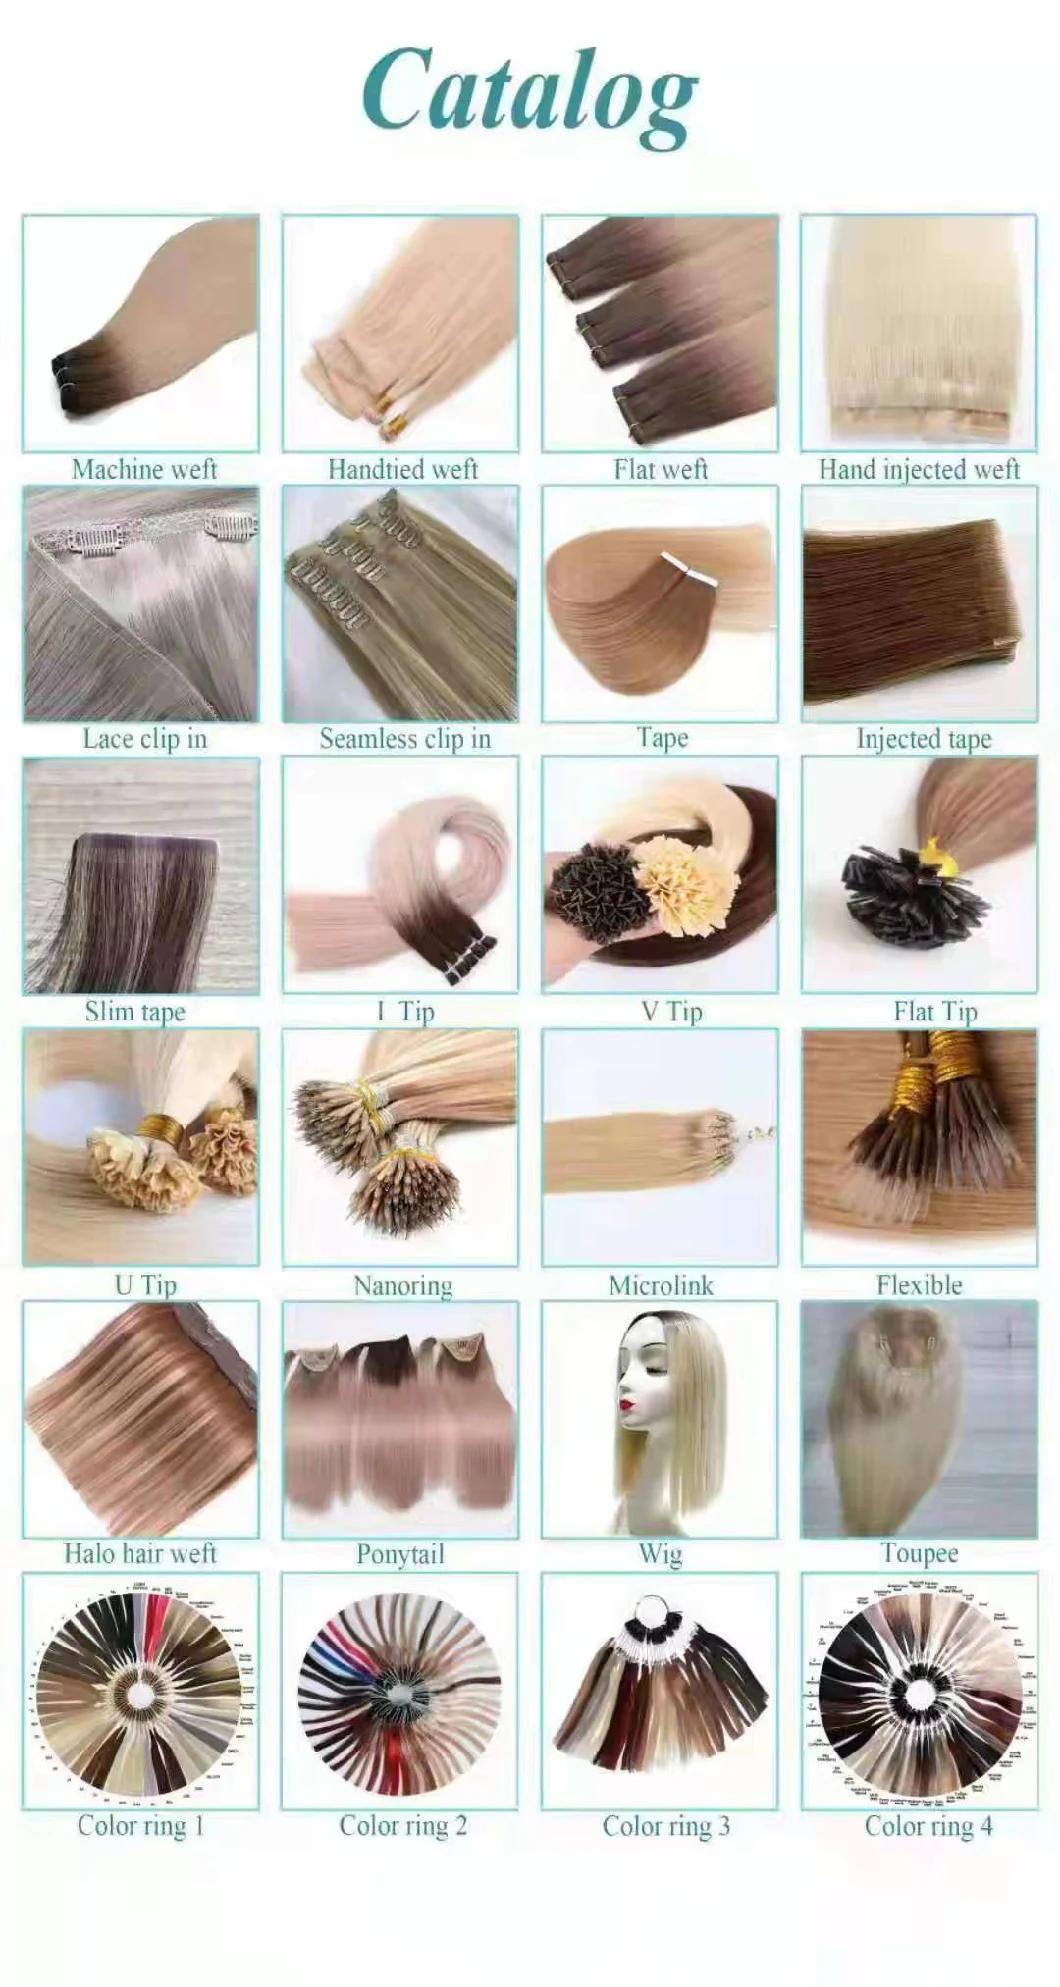 Wholesale 100% Real Remy Clip in Hair Extension, High Quanlity Hair Ornaments.